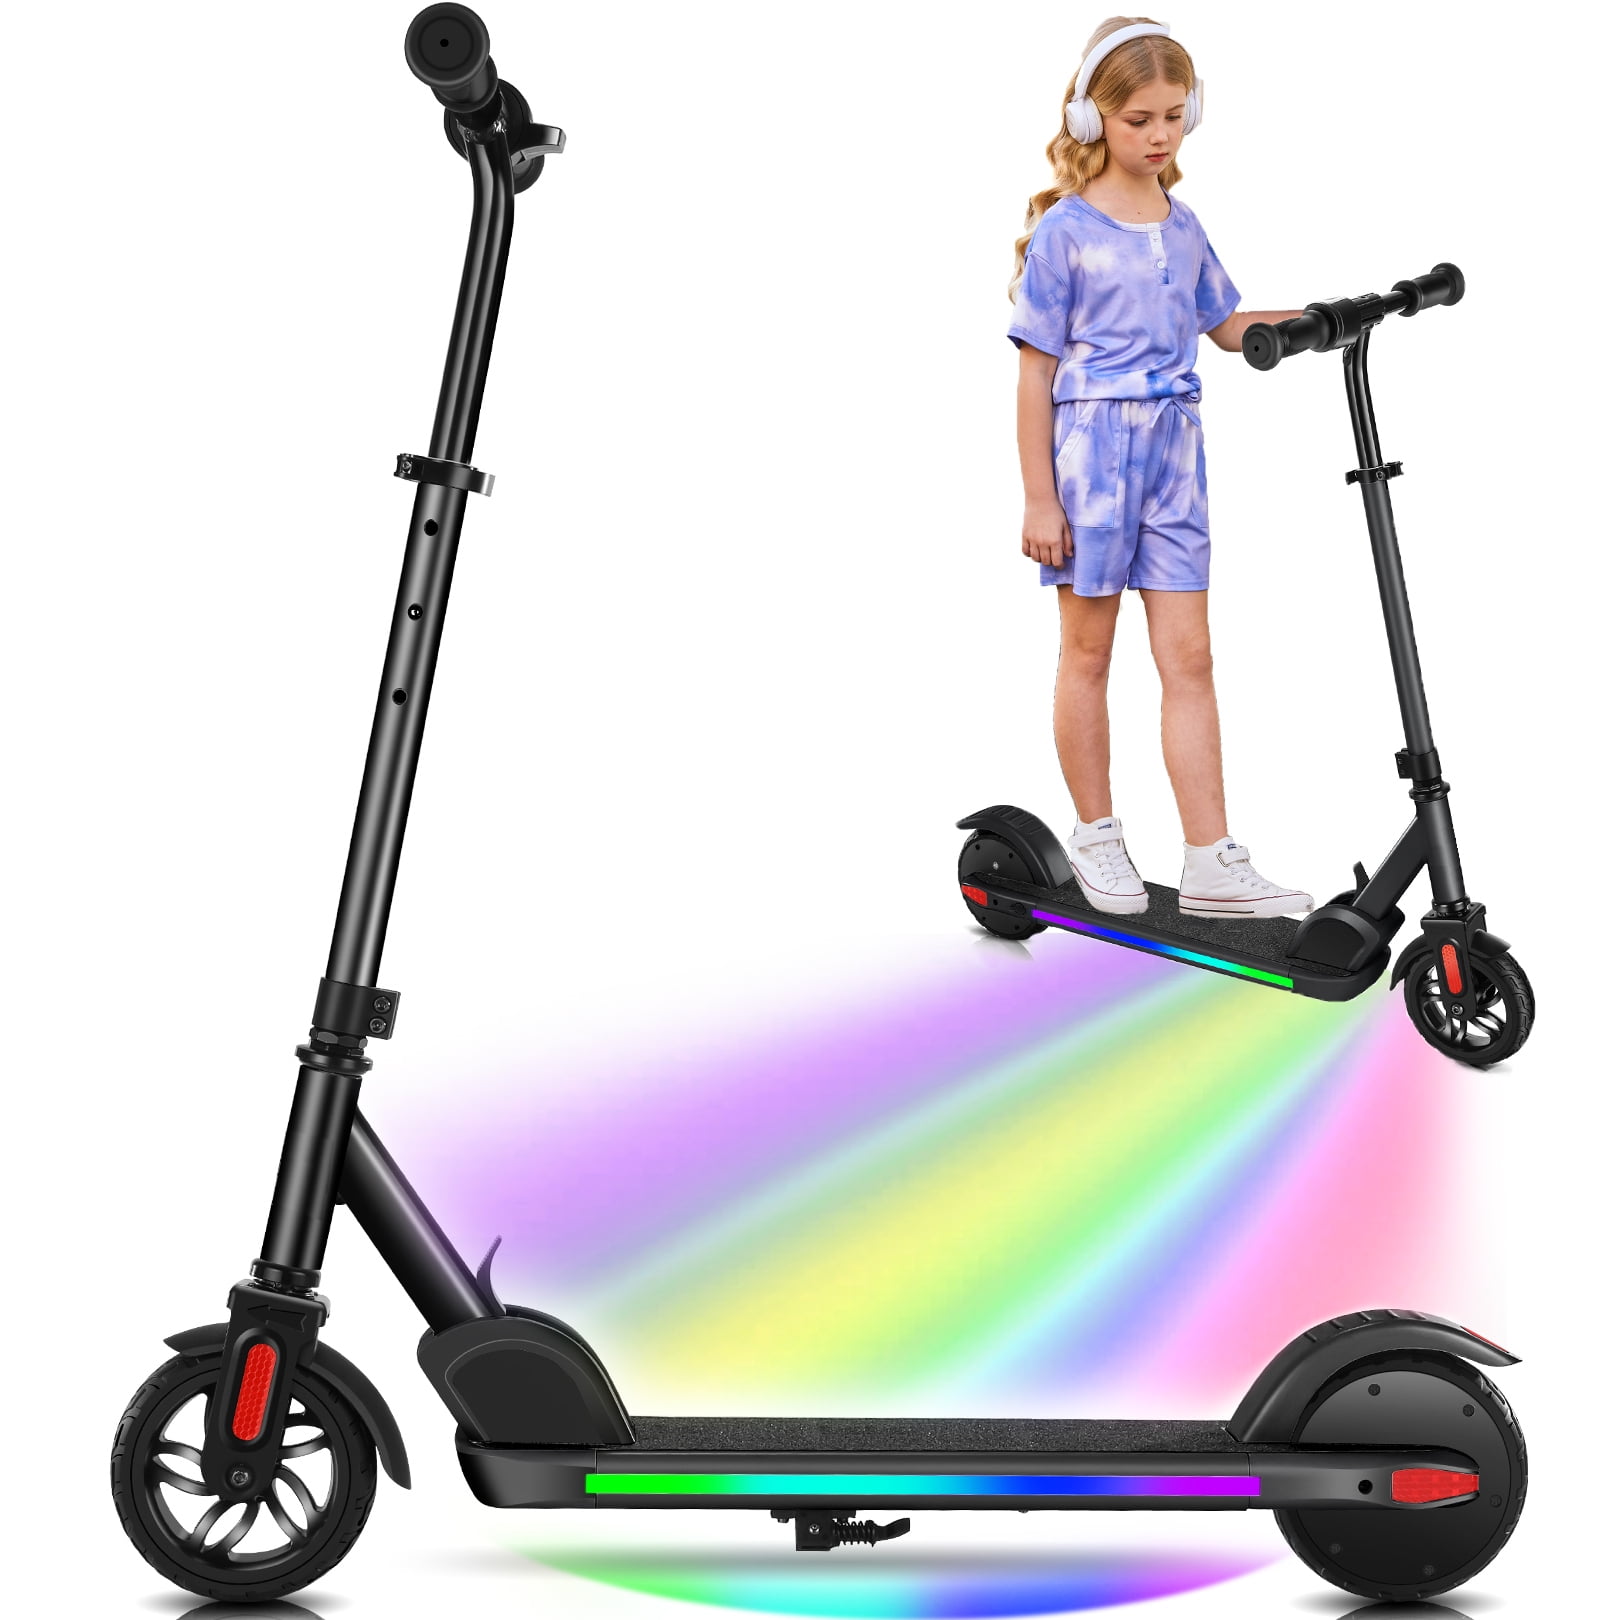 FAO Schwarz Kids LED Light-Up Spinner 3-Wheel Scooter Red White Striped  Kickstart Razor with Adjustable Height Fun Activity for Outdoor Day/Night  Play | Stuntscooter